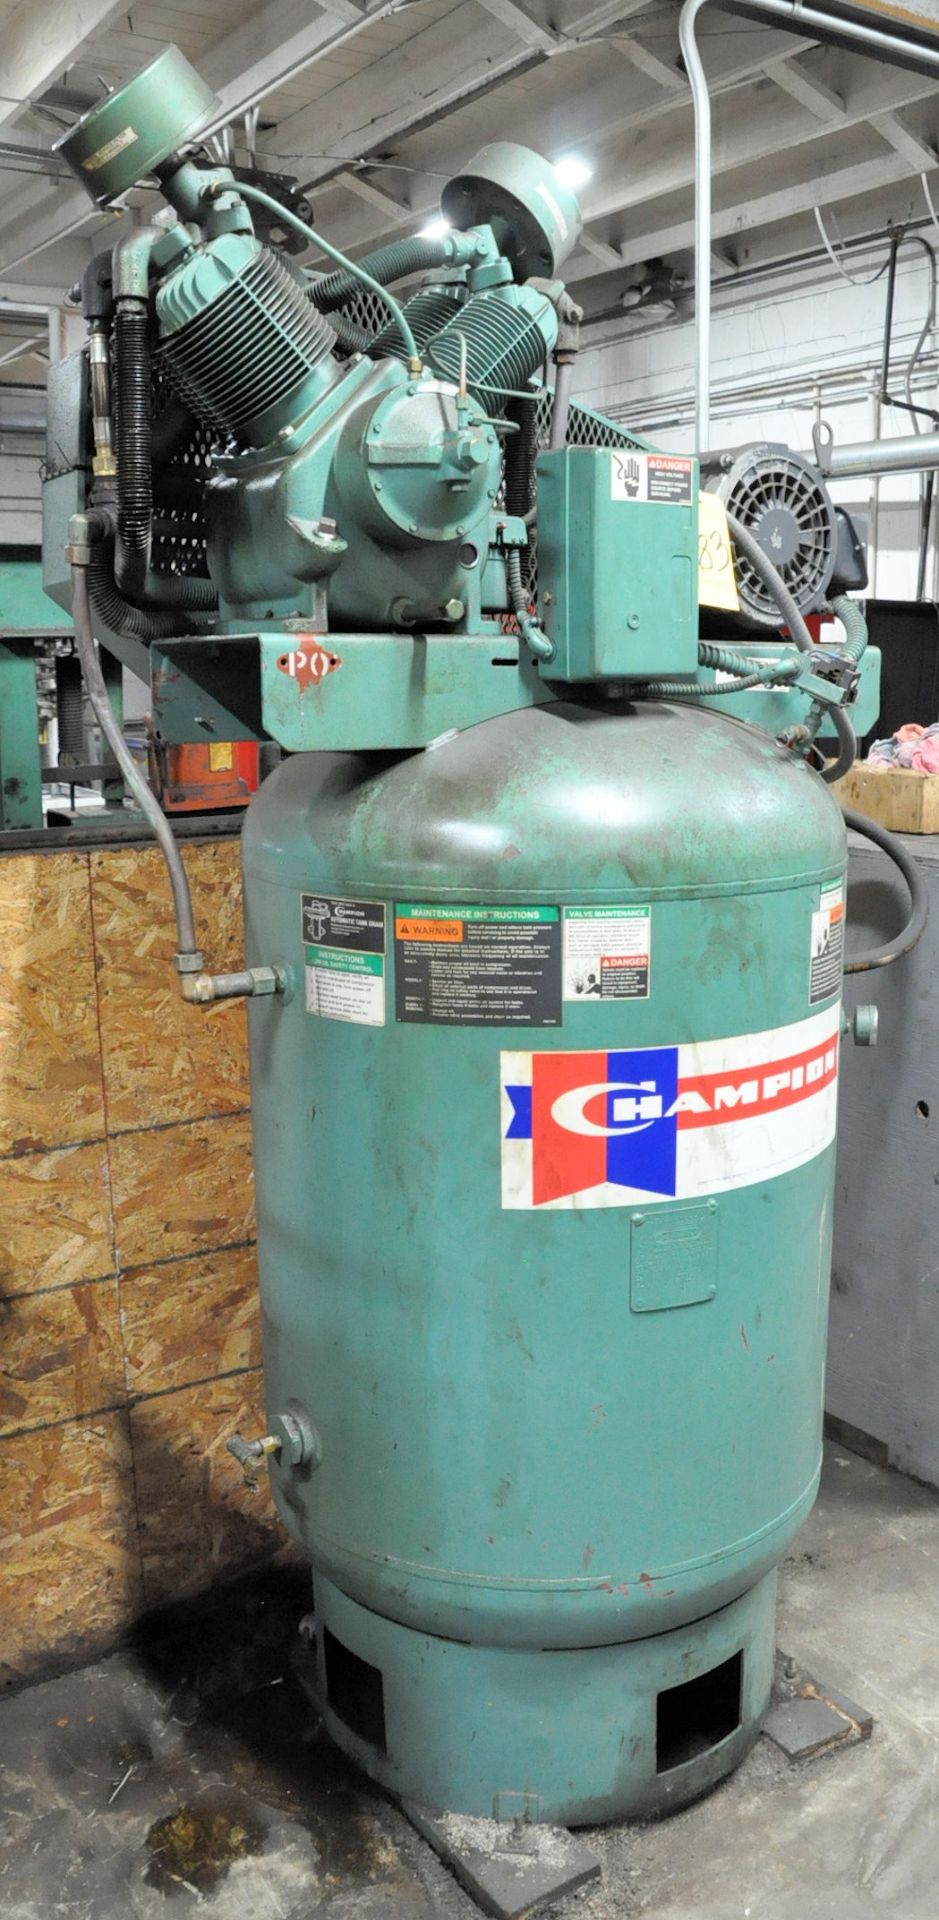 Champion 10-HP Vertical Tank Mounted Air Compressor, S/n N/a, 3-PH - Image 2 of 2